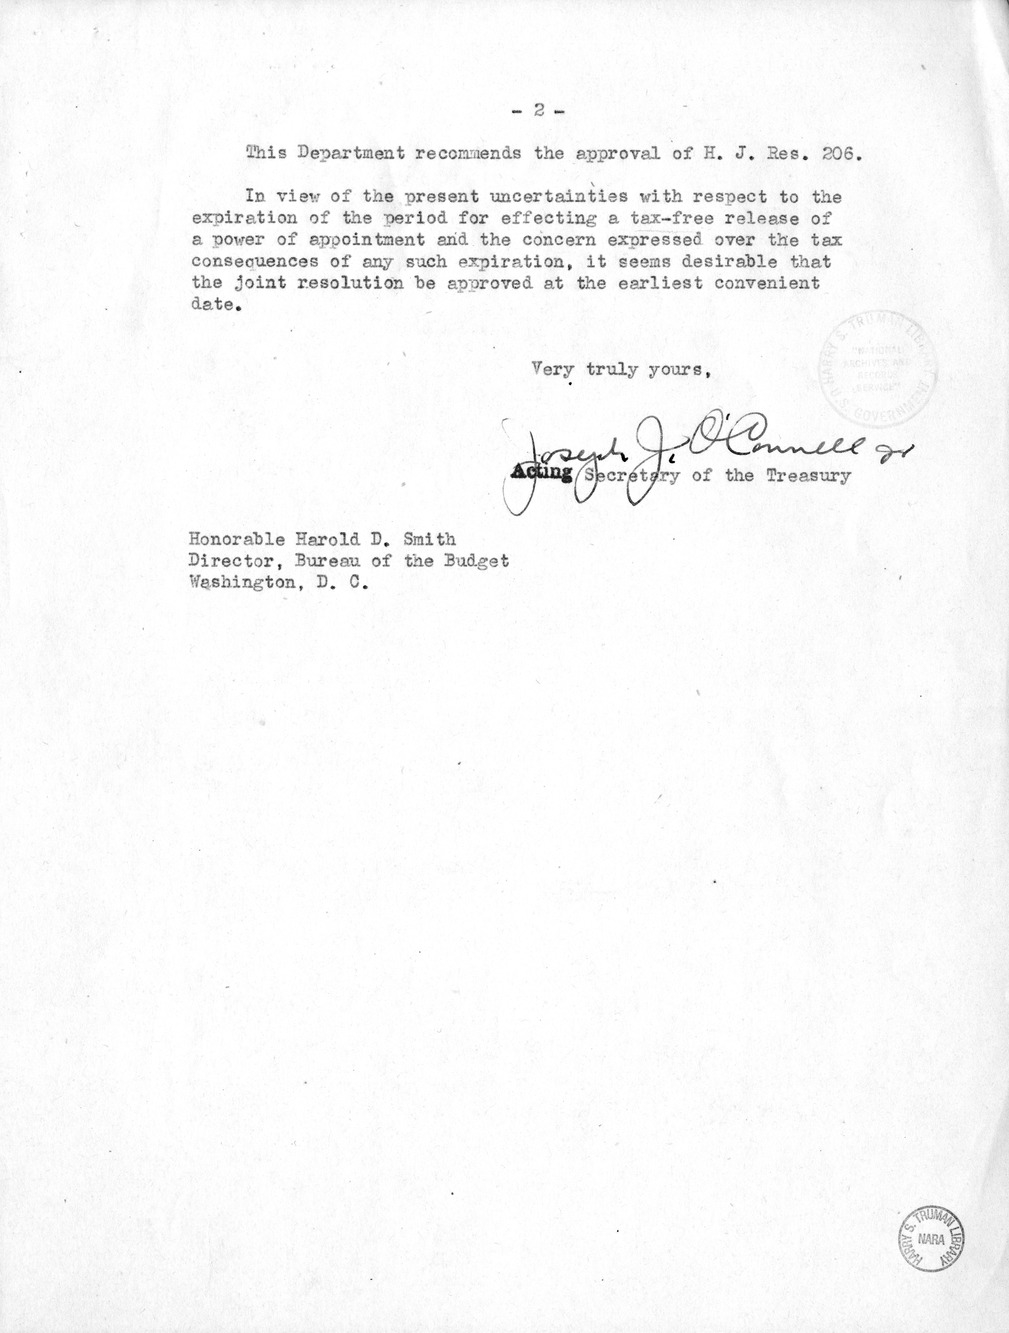 Memorandum from Frederick J. Bailey to M. C. Latta, H.J. Res. 206, Extending the Time for the Release of Powers of Appointment for the Purposes of Certain Provisions Internal Revenue Code, with Attachments